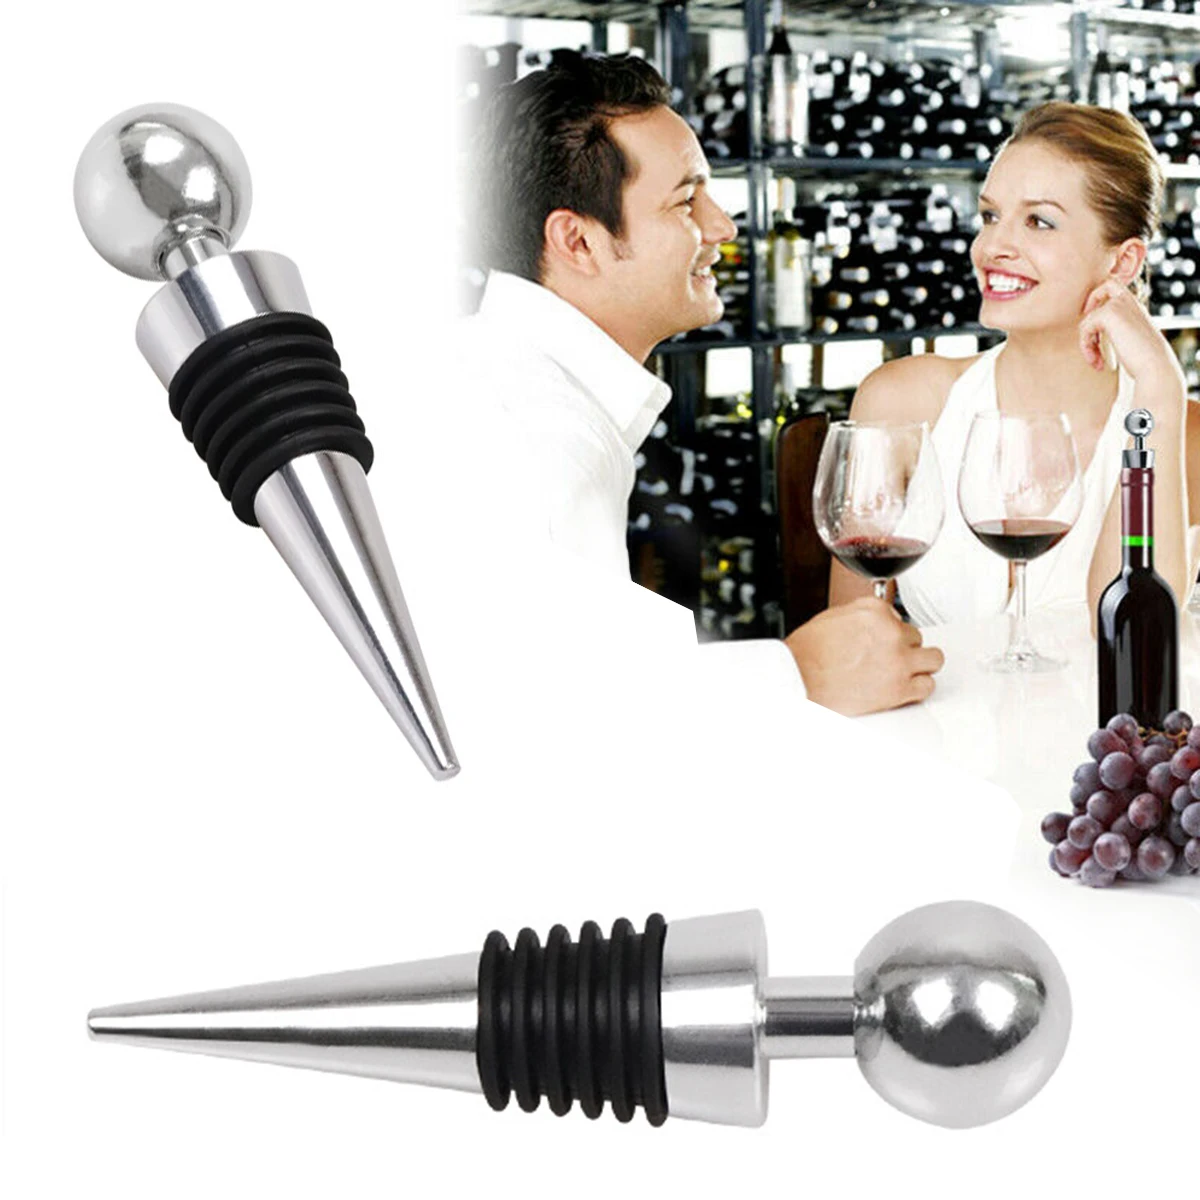 

2Pcs Stainless Steel Wine Stopper Vacuum Sealed Beer Beverage Stoppers Cork for Bottle Cap Storage Twist Plug Kitchen Bar Tool